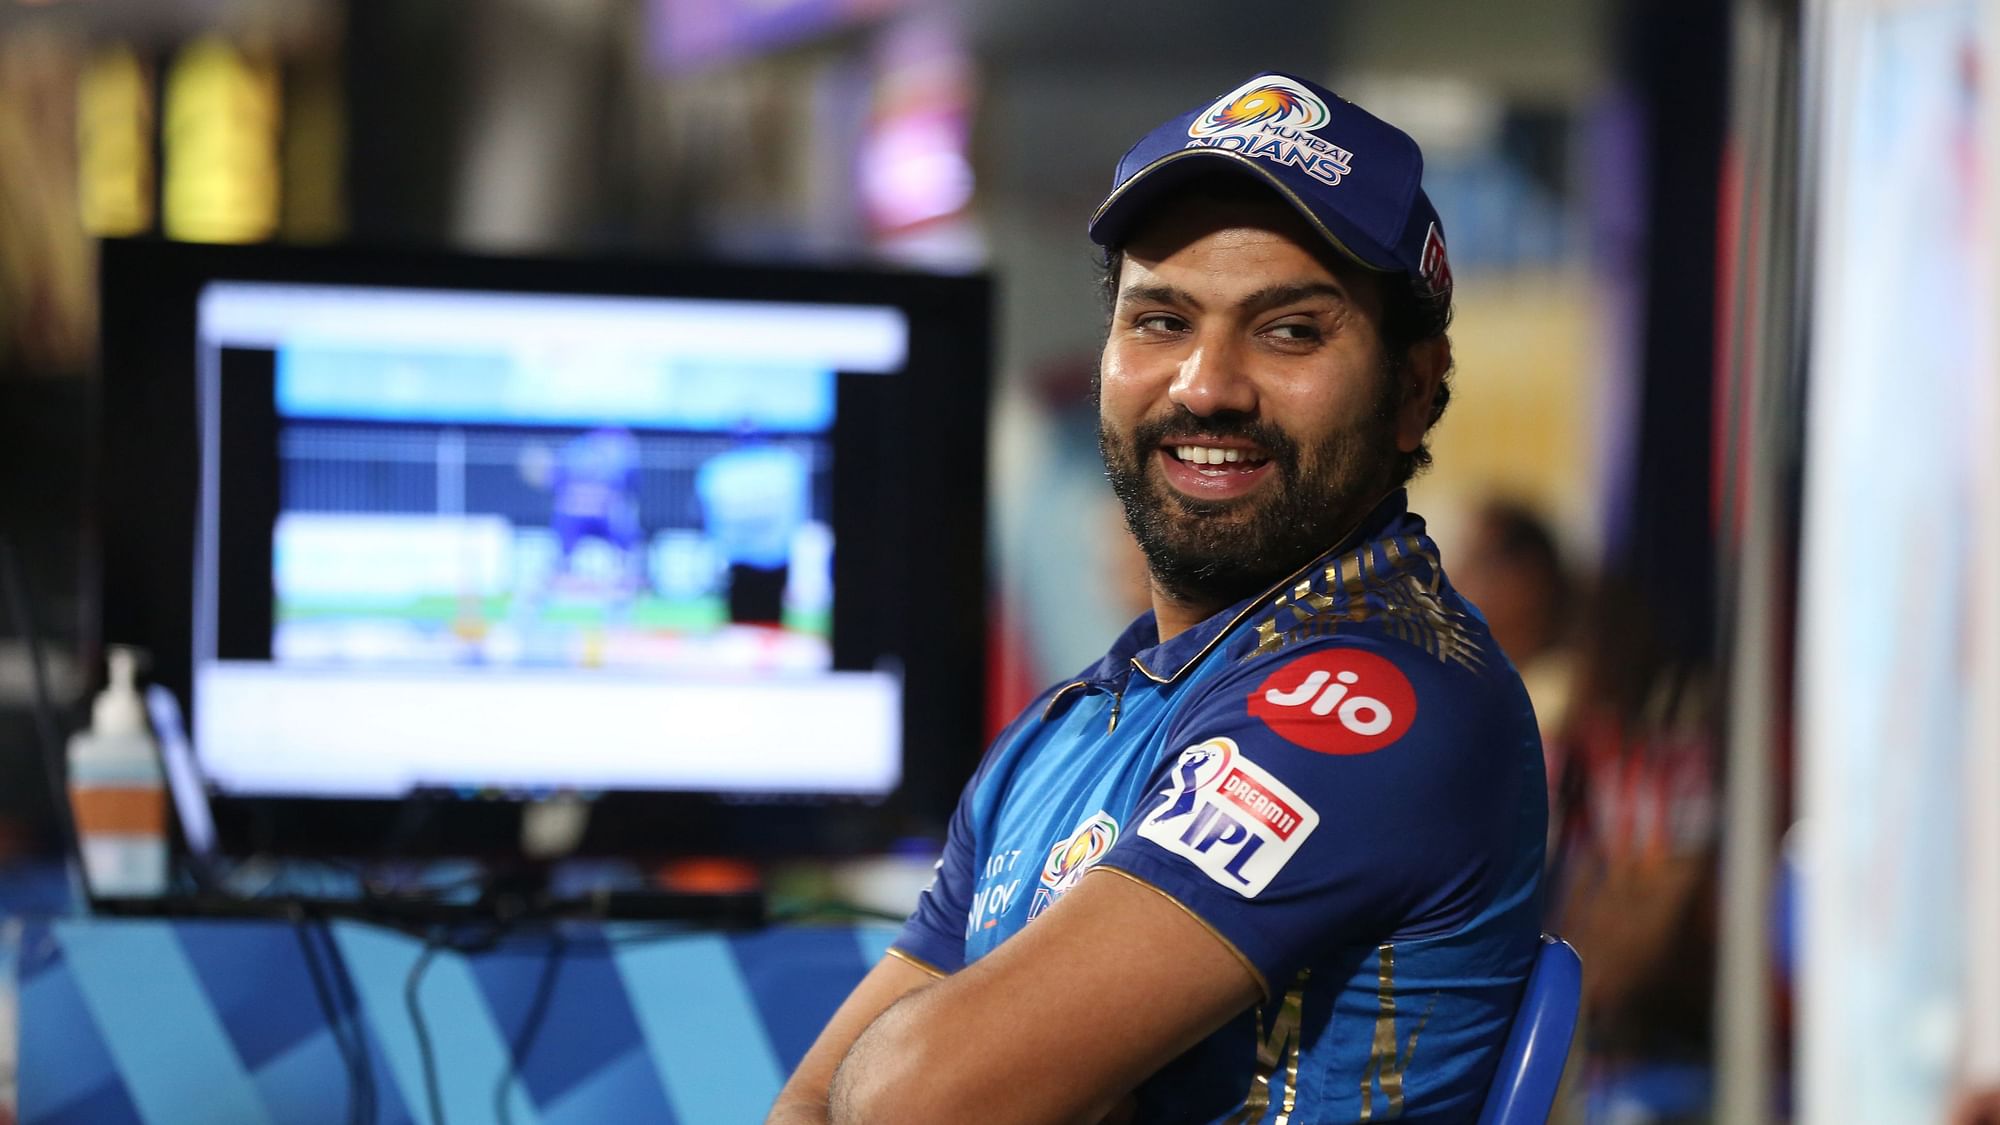 After being left out of India’s squads due to his injury, Rohit Sharma says his hamstring is ‘absolutely’ fine.